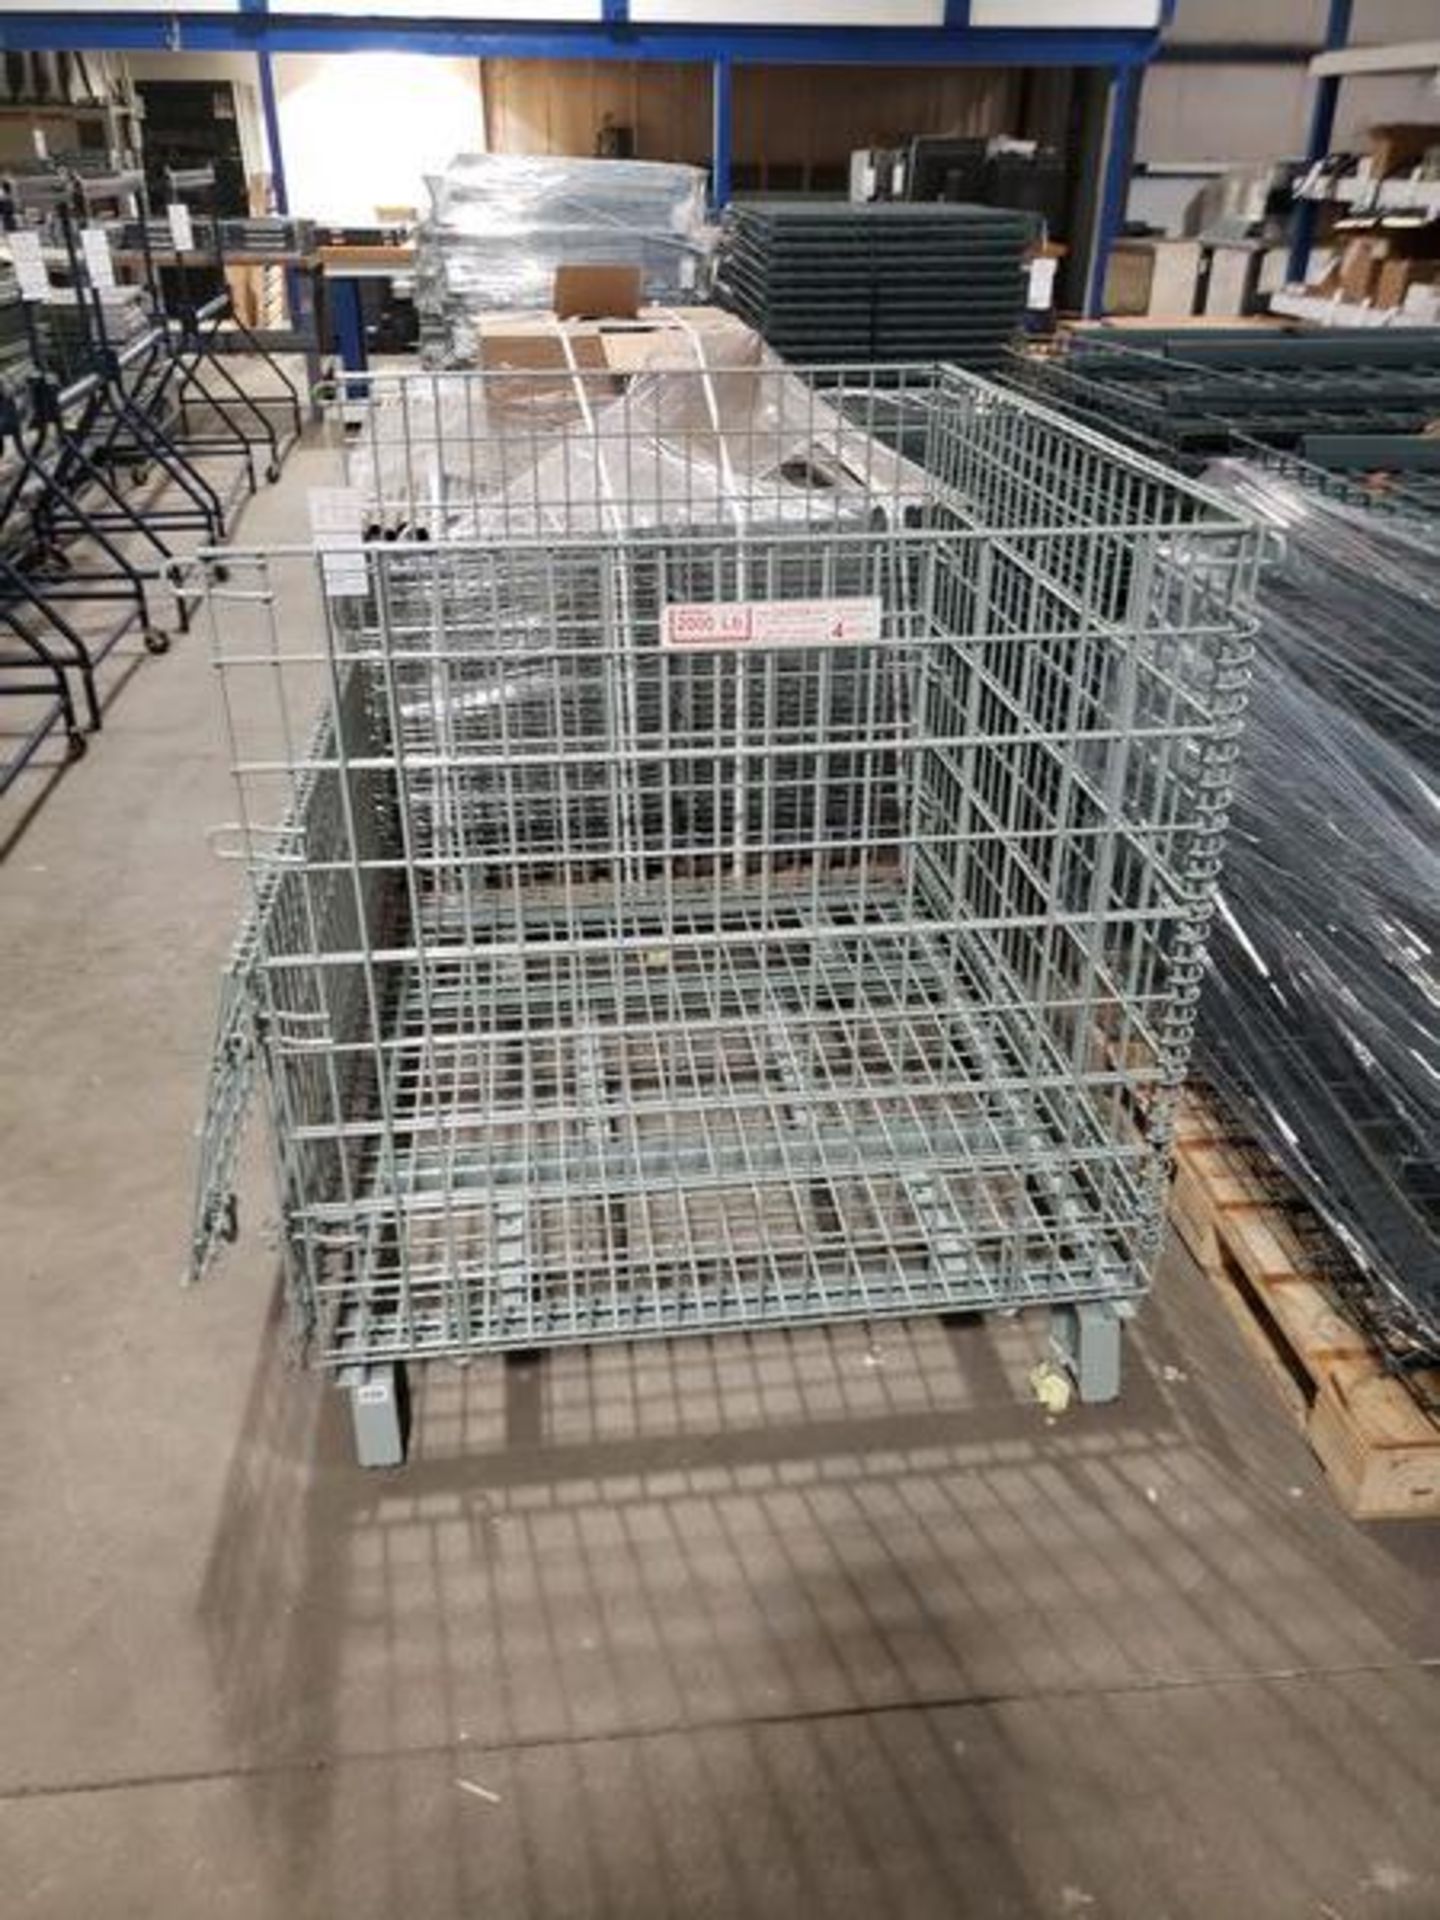 GLOBAL INDUSTRIAL FOLDING WIRE CONTAINERS 48" X 40" X 42.5" - 4000LB CAP - MODEL 239344 - Image 3 of 4